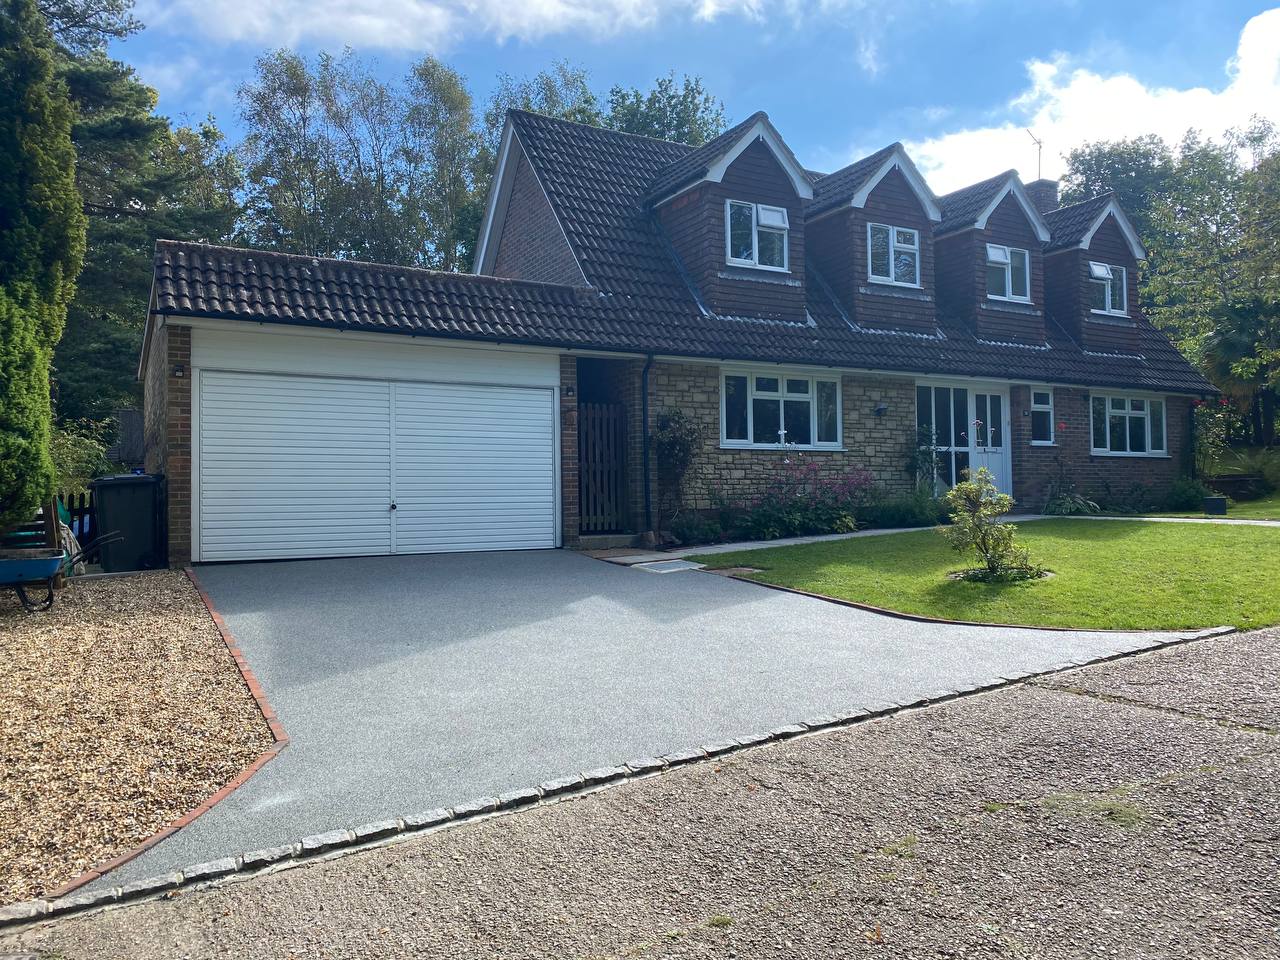 This is a photo of a resin driveway installed in Nottingham by Birmingham Resin Driveways